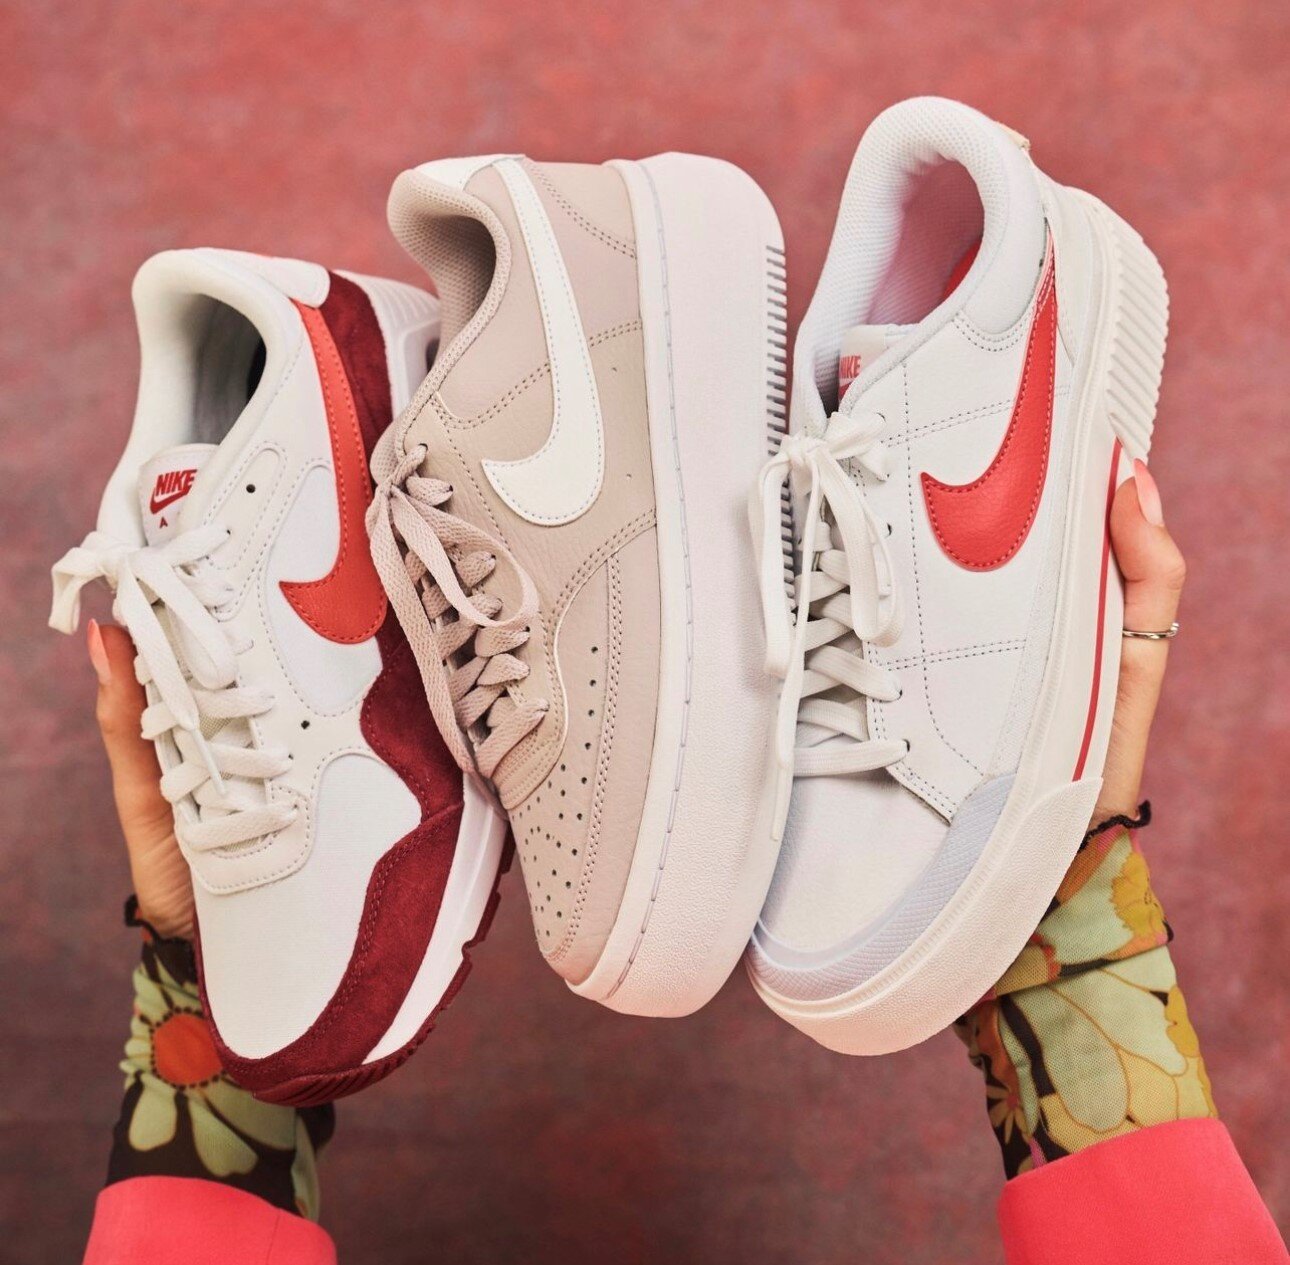 Drop a hint to your significant other: Roses are red, violets are blue, and the shoes I want are at DSW! ❤️👟

📷👟: Nike Air Max SC, Court Vision Alta &amp; Court Legacy Lift
#DSW #greenwaystation #greenwayshopping #valentinesday #loveisintheair #ni